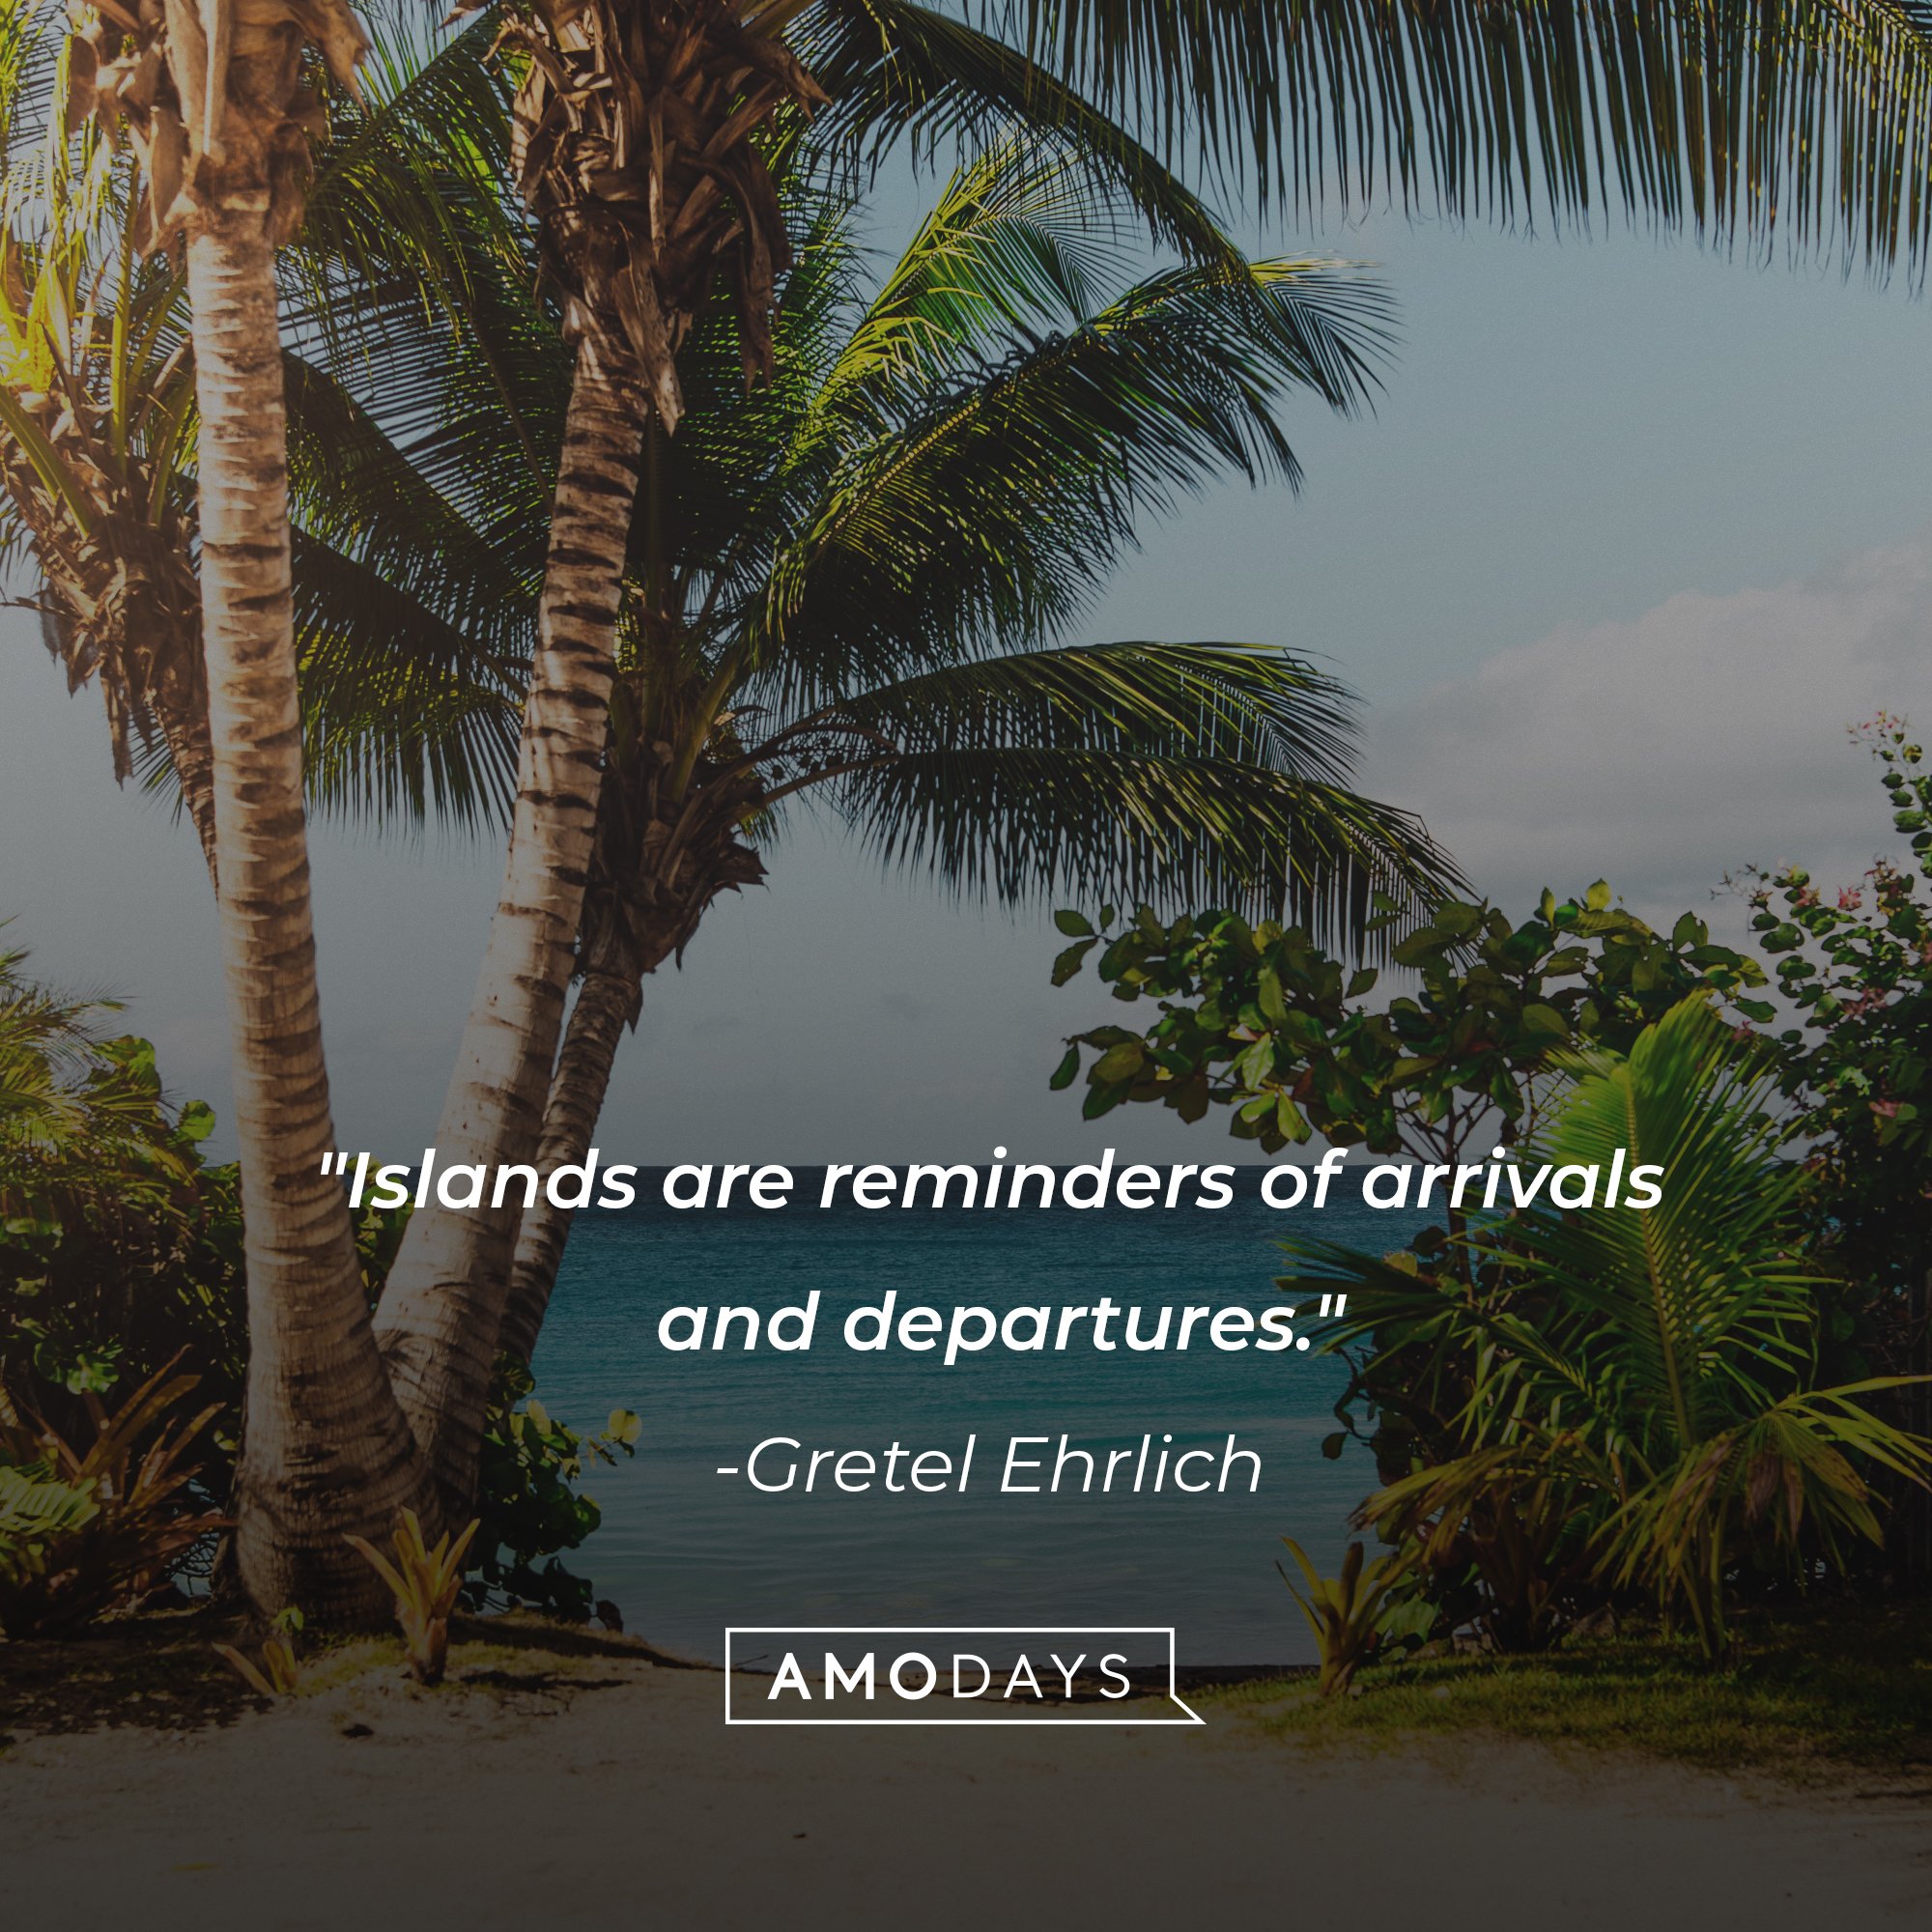 Gretel Ehrlich's quote: "Islands are reminders of arrivals and departures." | Image: AmoDays